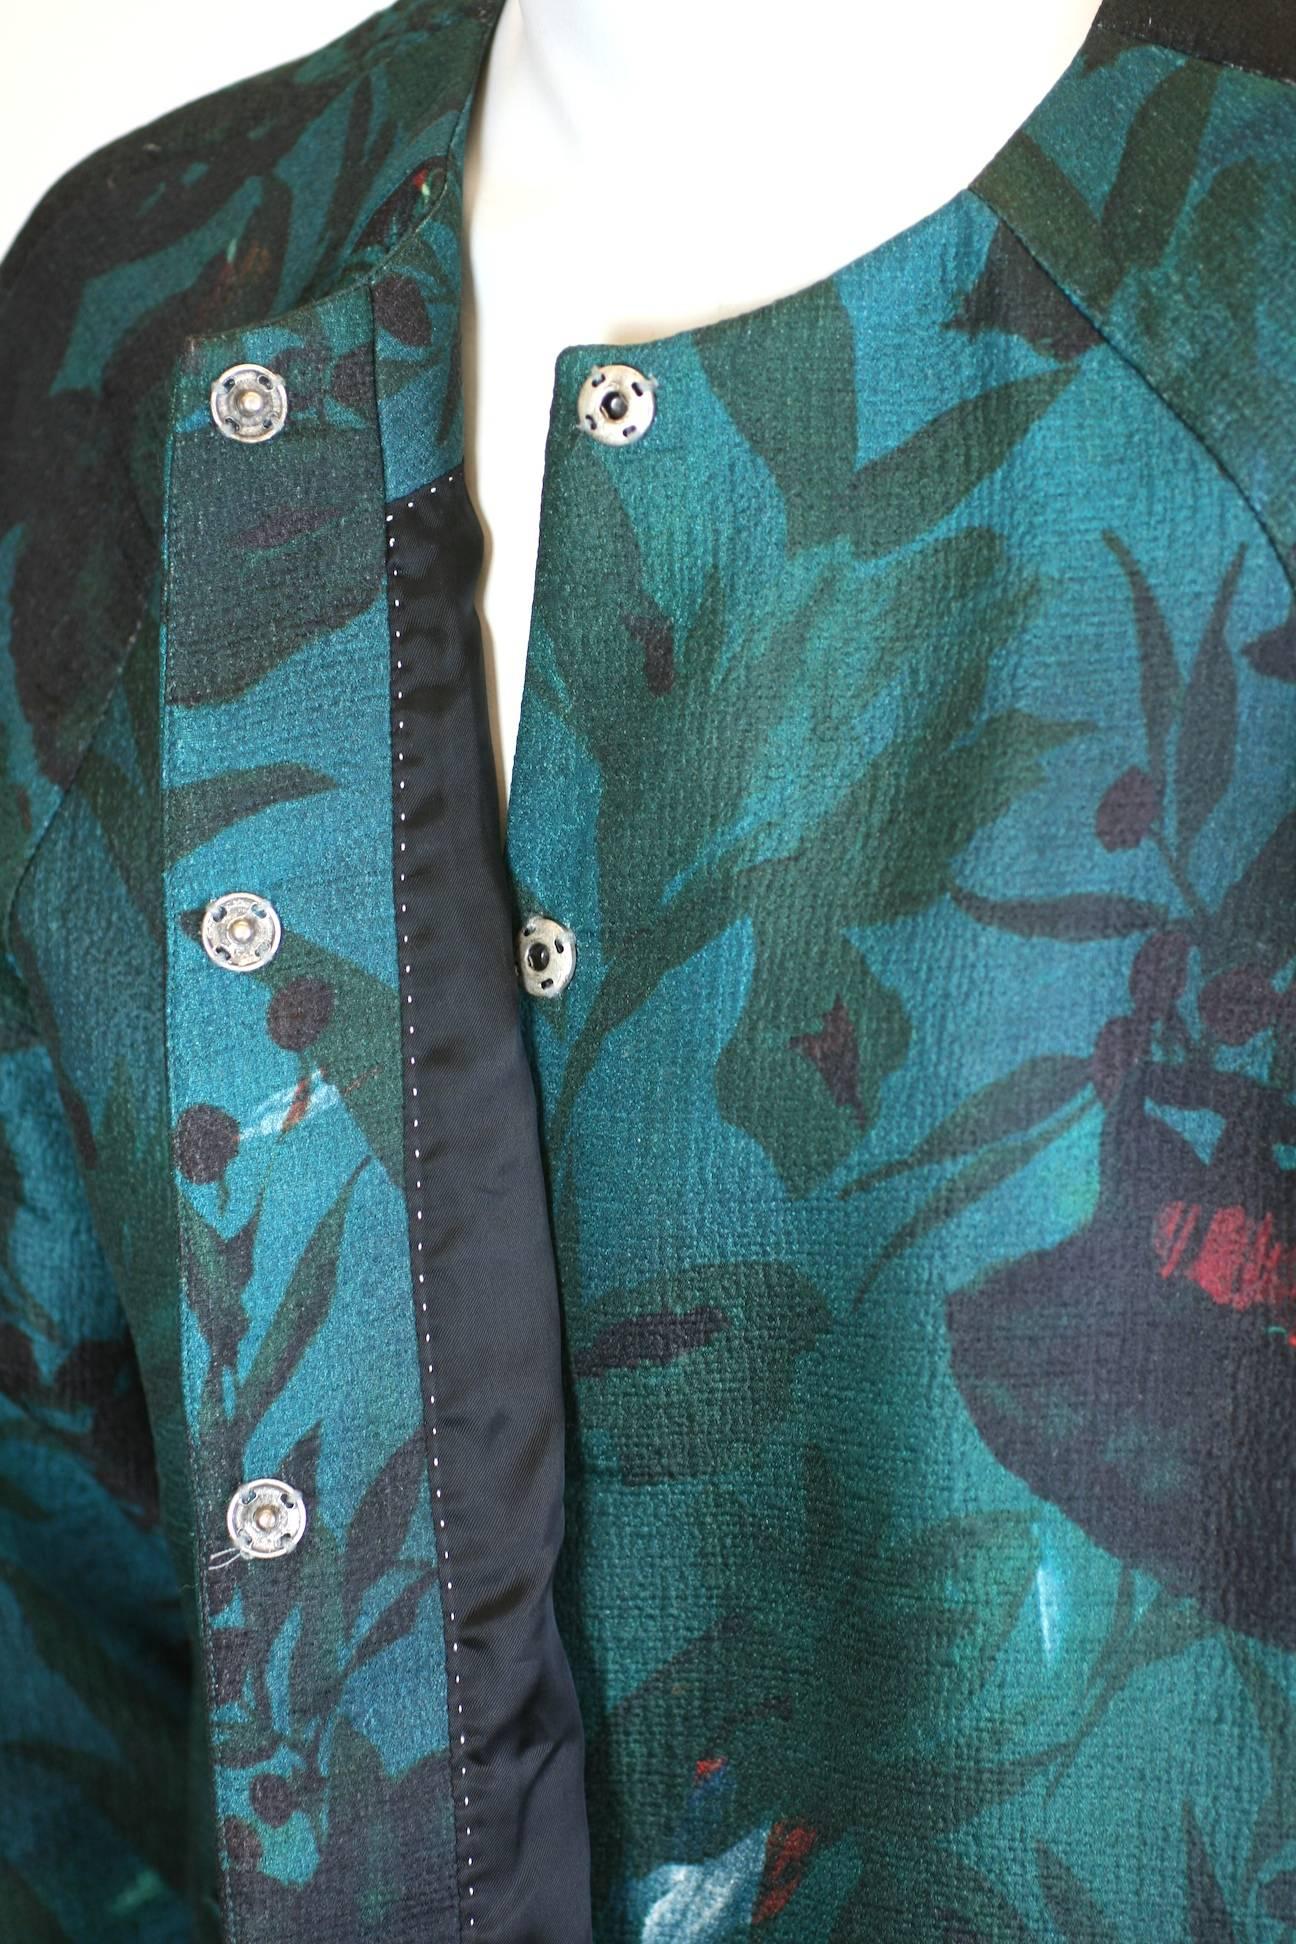 Dries Van Noten Dark Floral Jacket In Excellent Condition For Sale In New York, NY